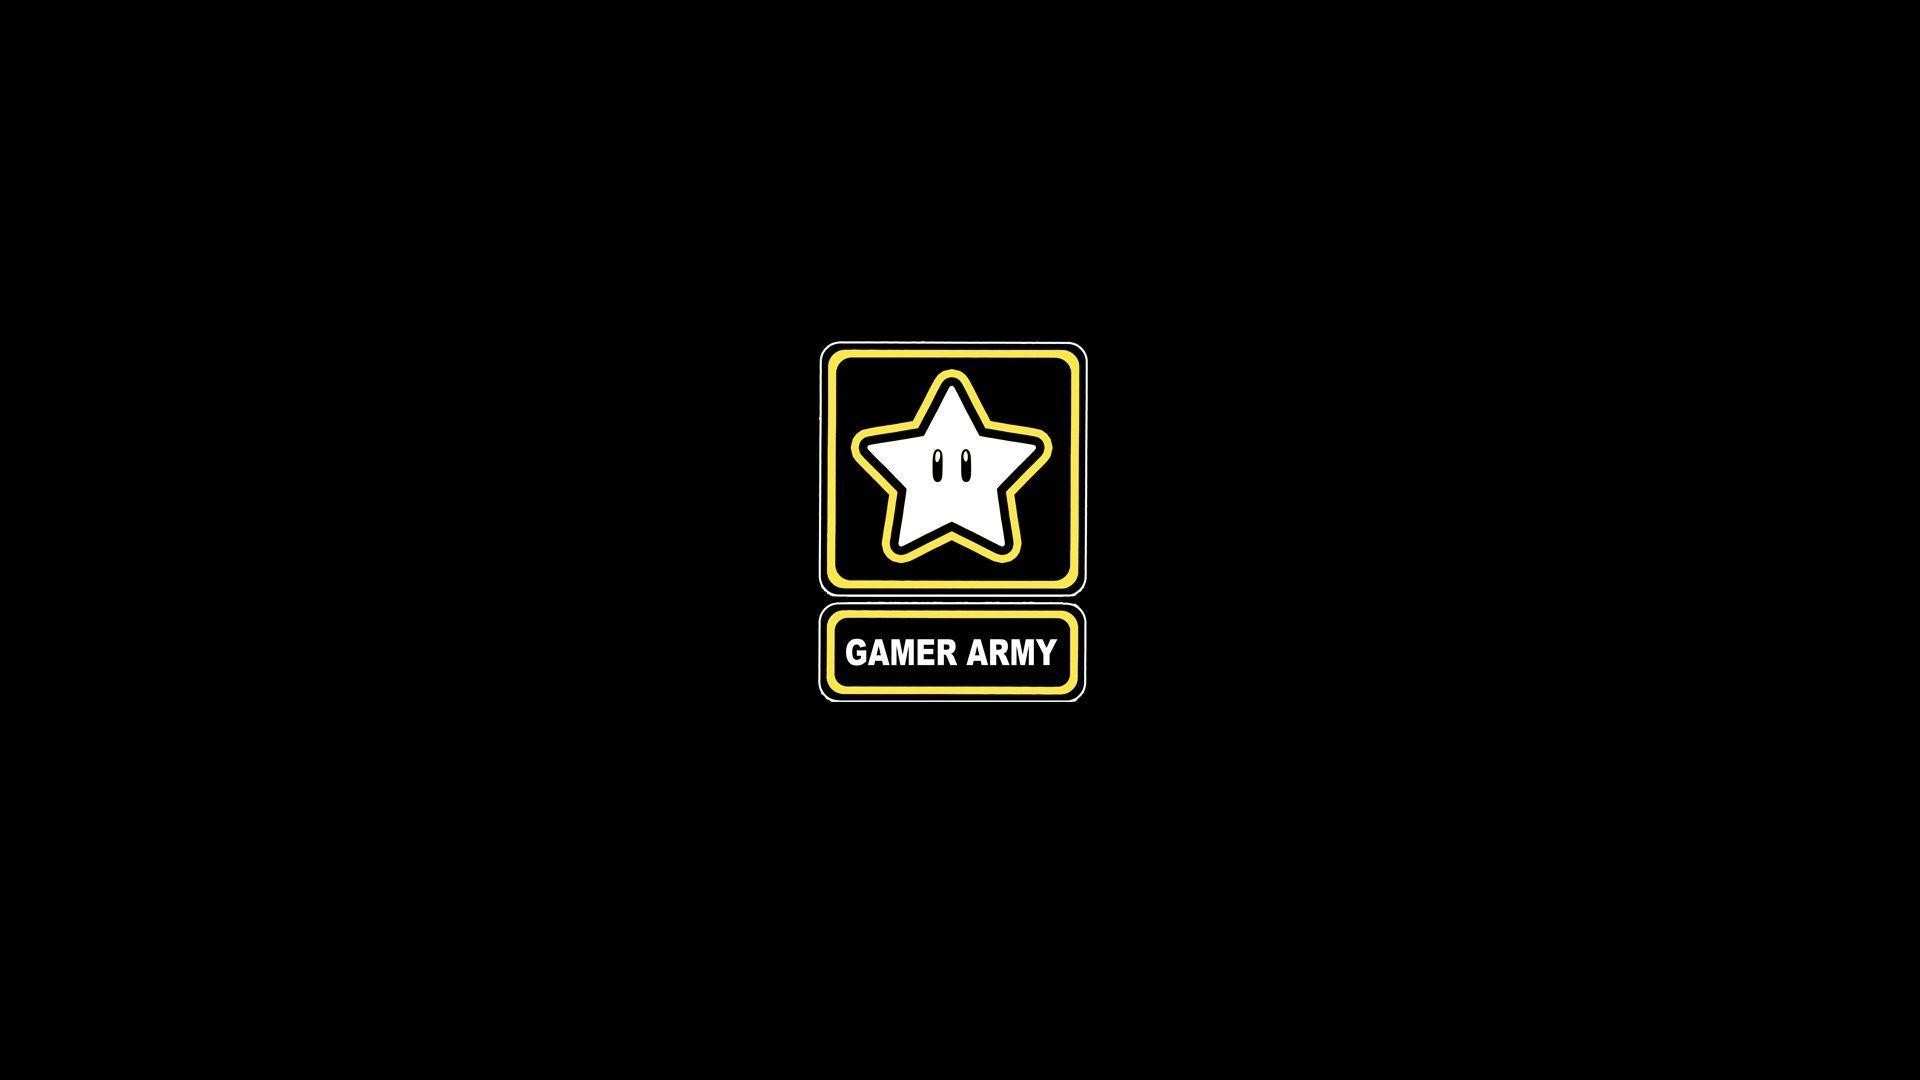 1920x1080 Gamers Wallpaper : Wallpapers Basic Gamer Army Rating X ..